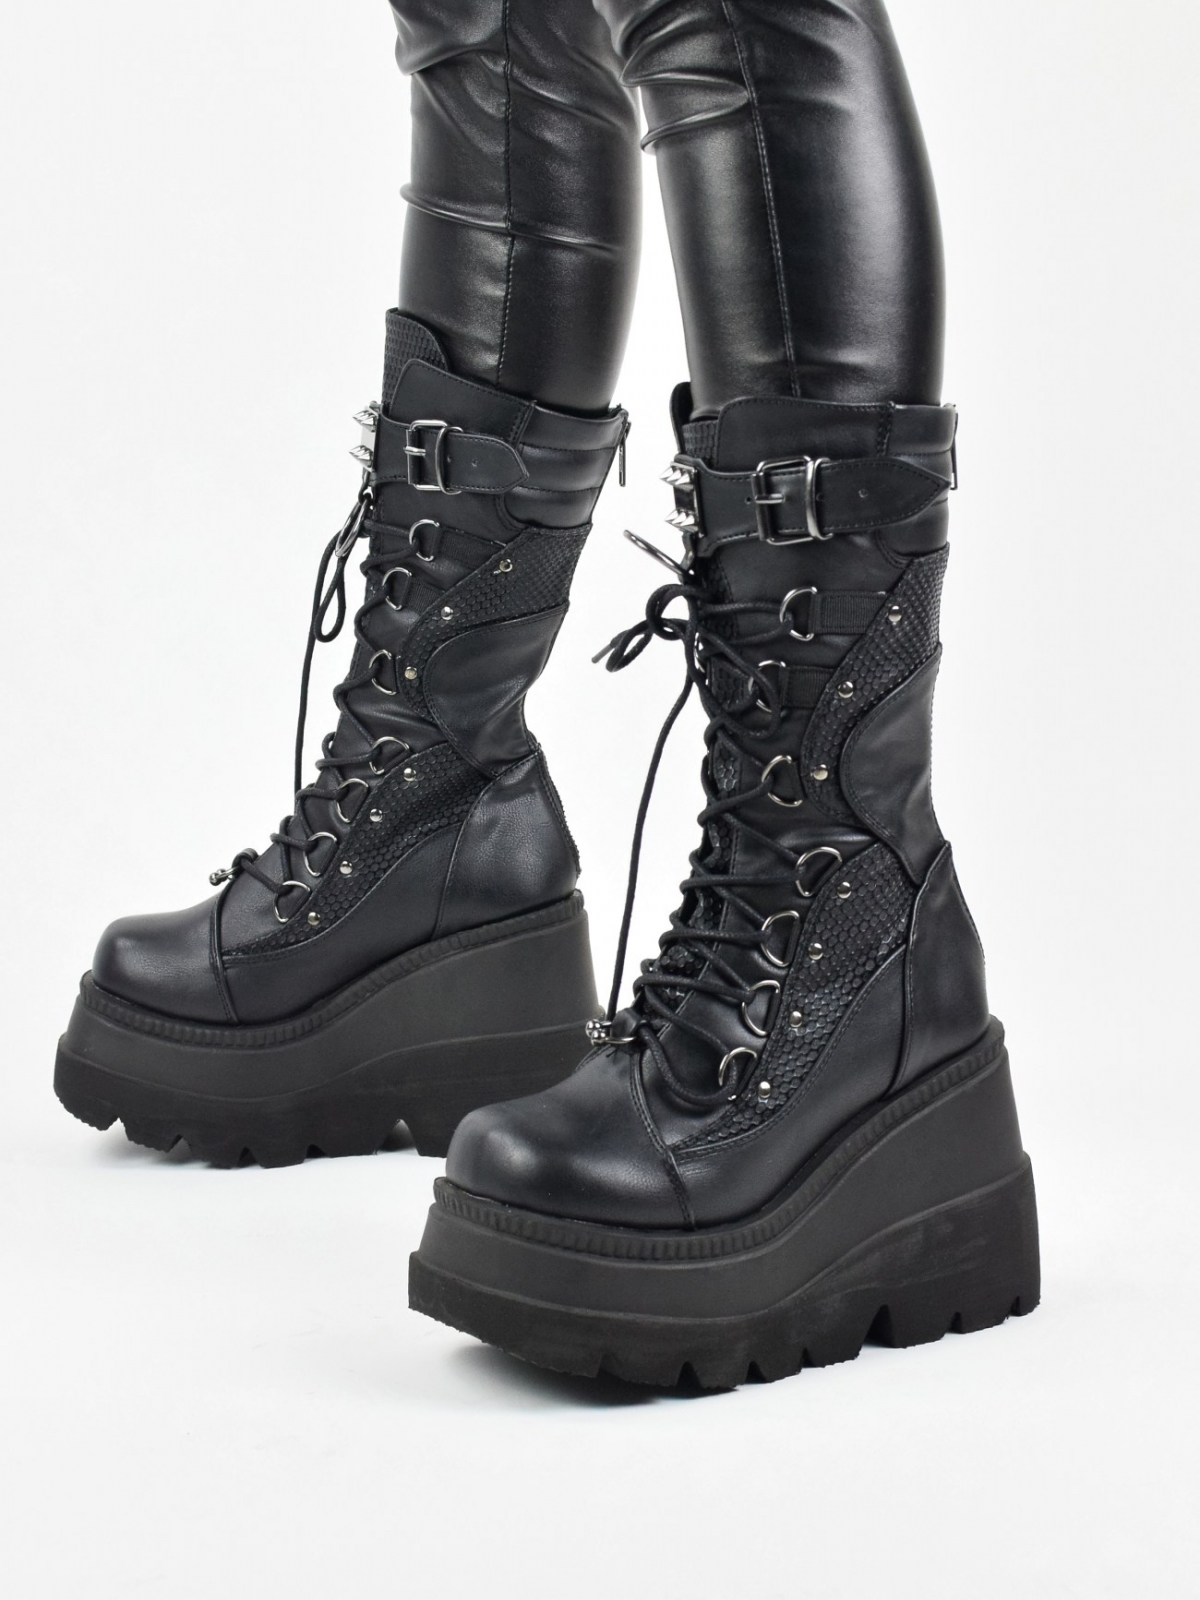 Demonia Shaker 70 lace up mid calf platform boots in black